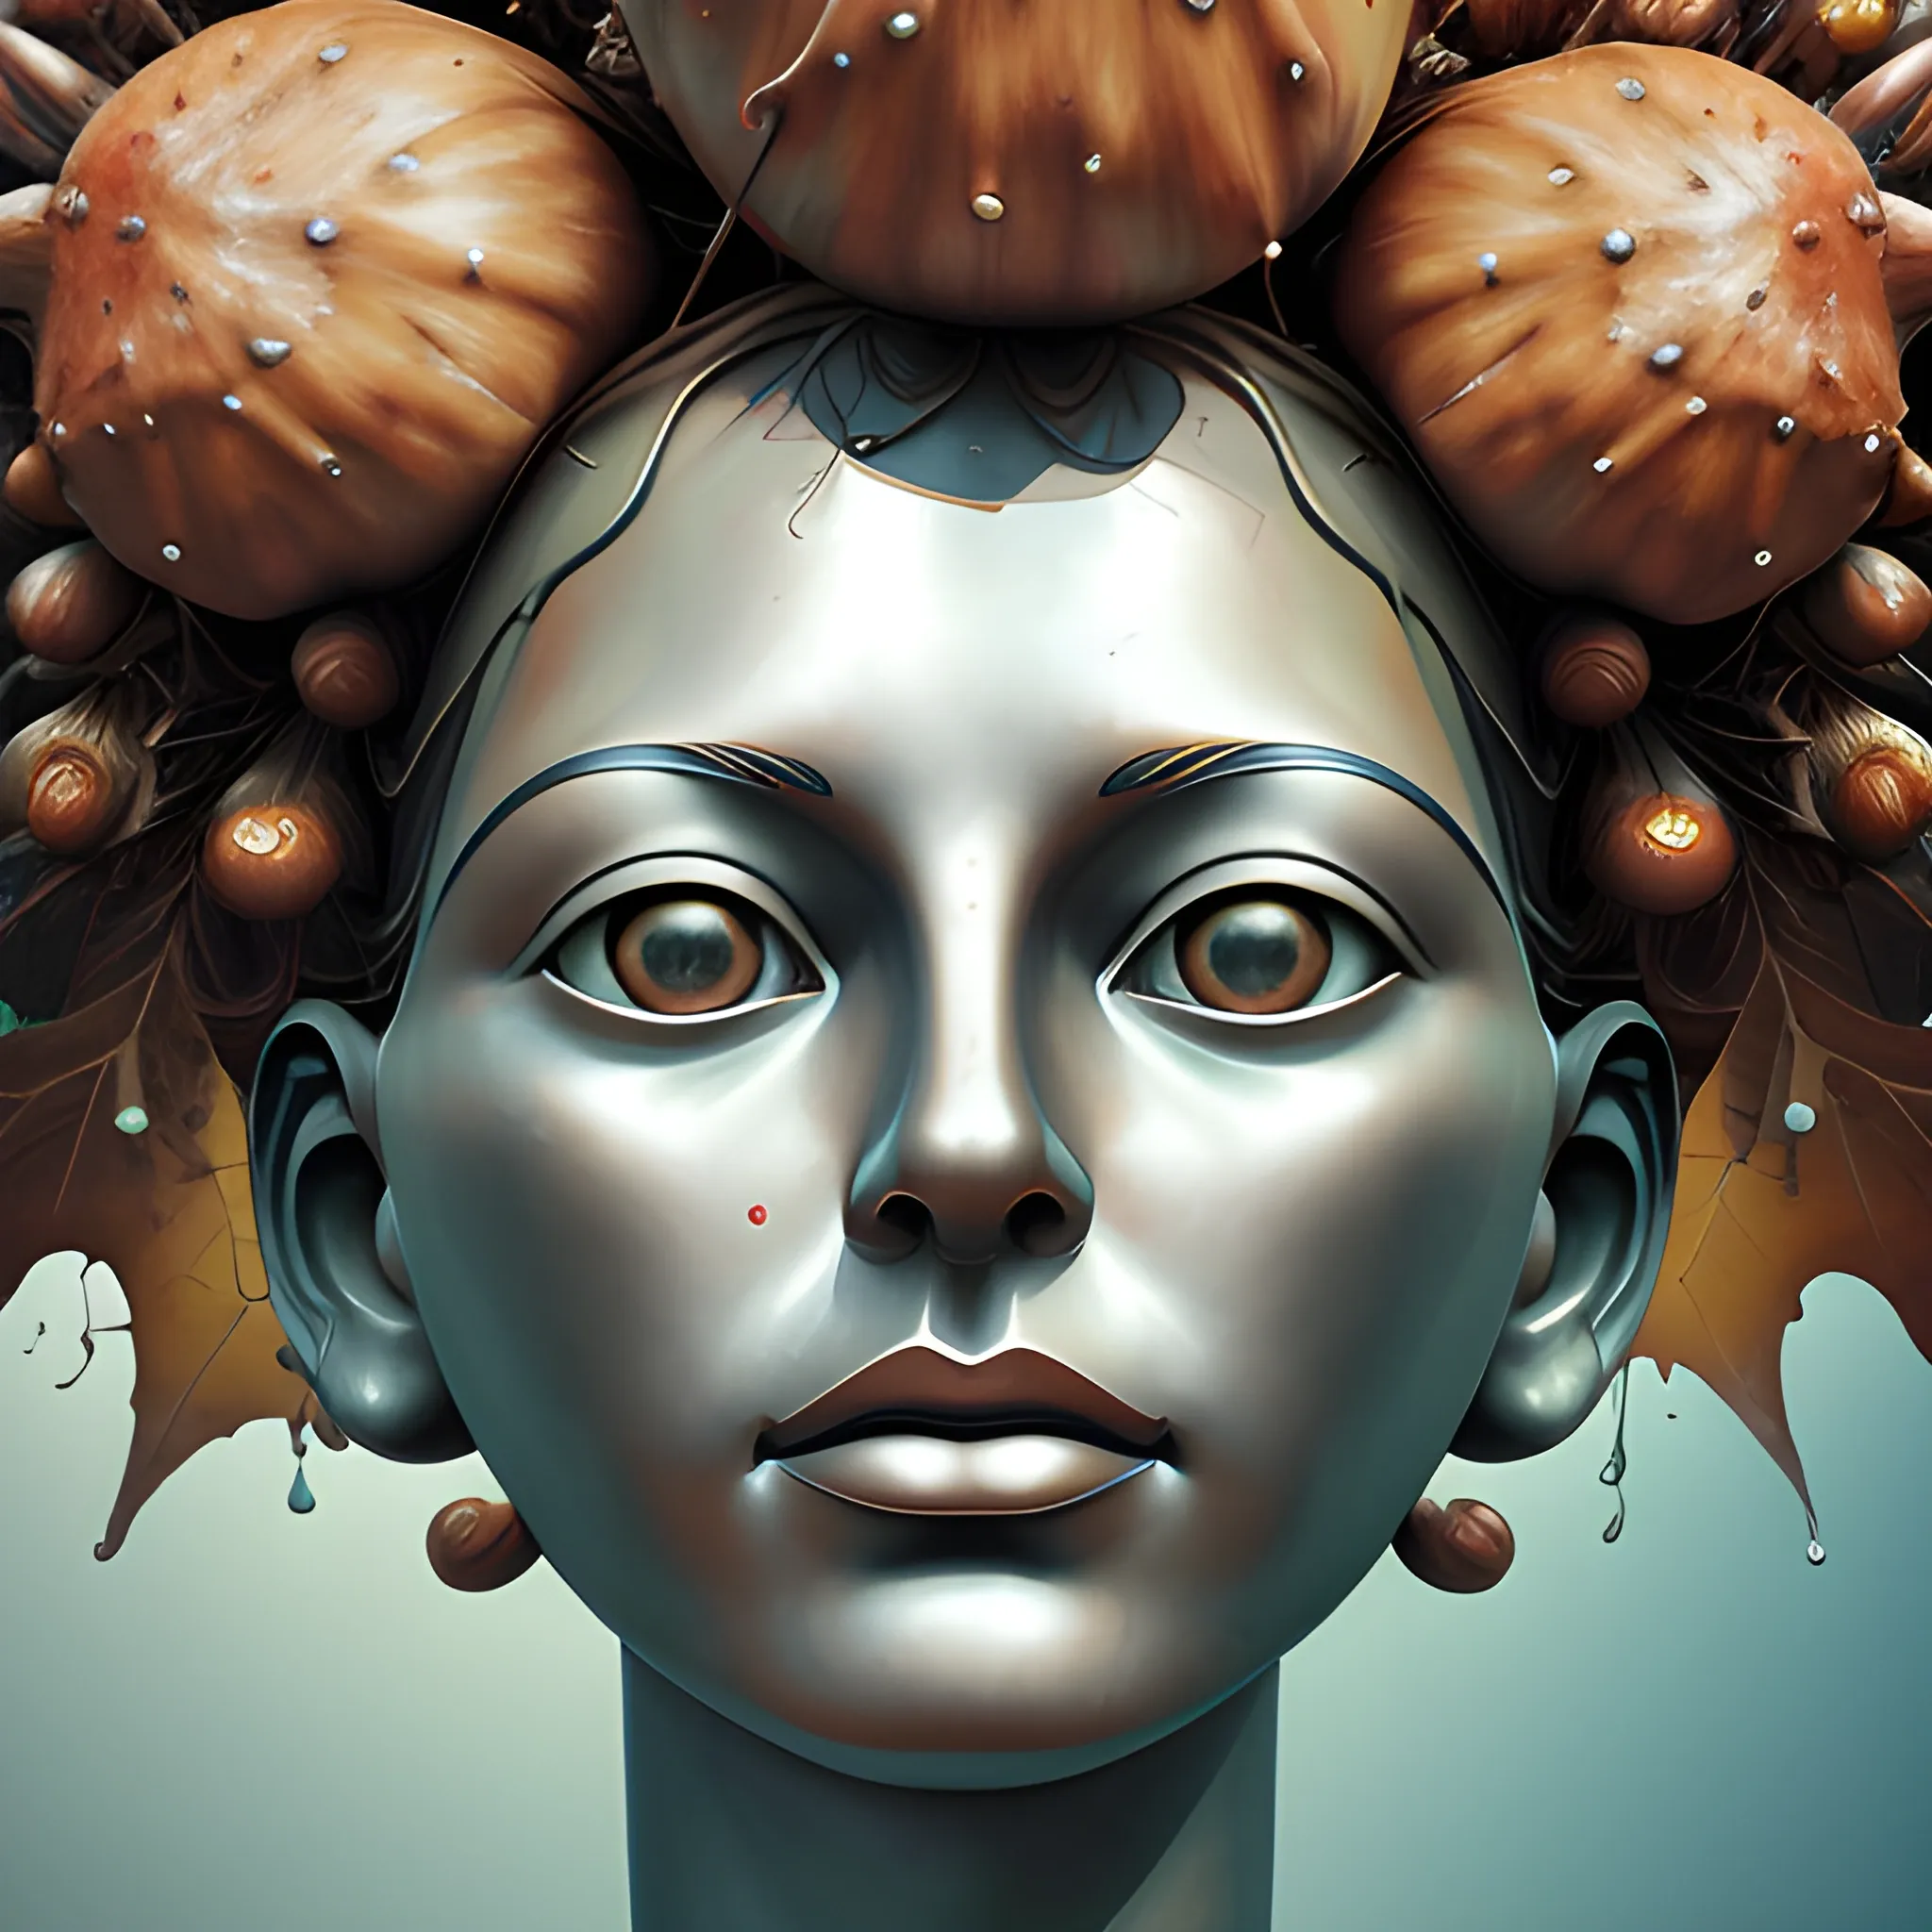 create a steel statue of a female human face to look like many crazy chestnuts, close up, saturated colors, surrealism, chaotic background many chestnuts and chestnut leaves floating around  3D, Trippy, eerie atmosphere, close up, illustration, angular perspective, Oil Painting, Water Color